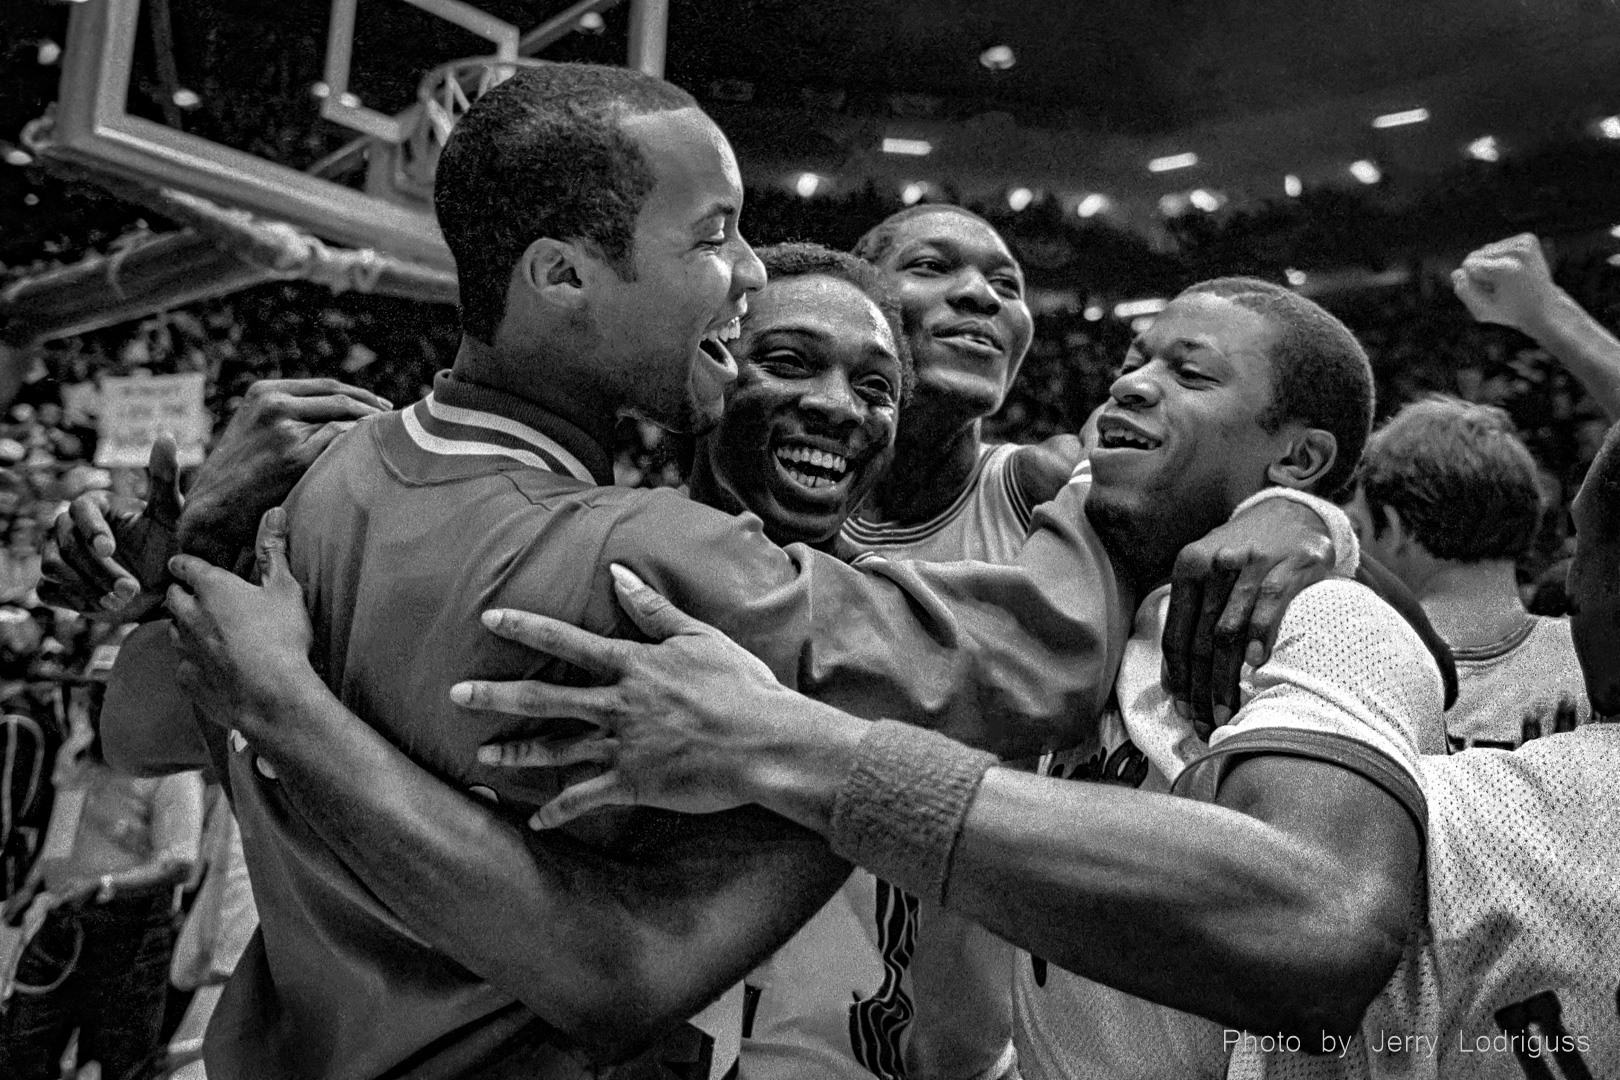 Houston's "Phi Slamma Jamma" celebrate win in the Final Four on April 2, 1983 in Albuquerque, NM that put them in the championship game against North Carolina State in the finals of the NCAA basketball tournament.